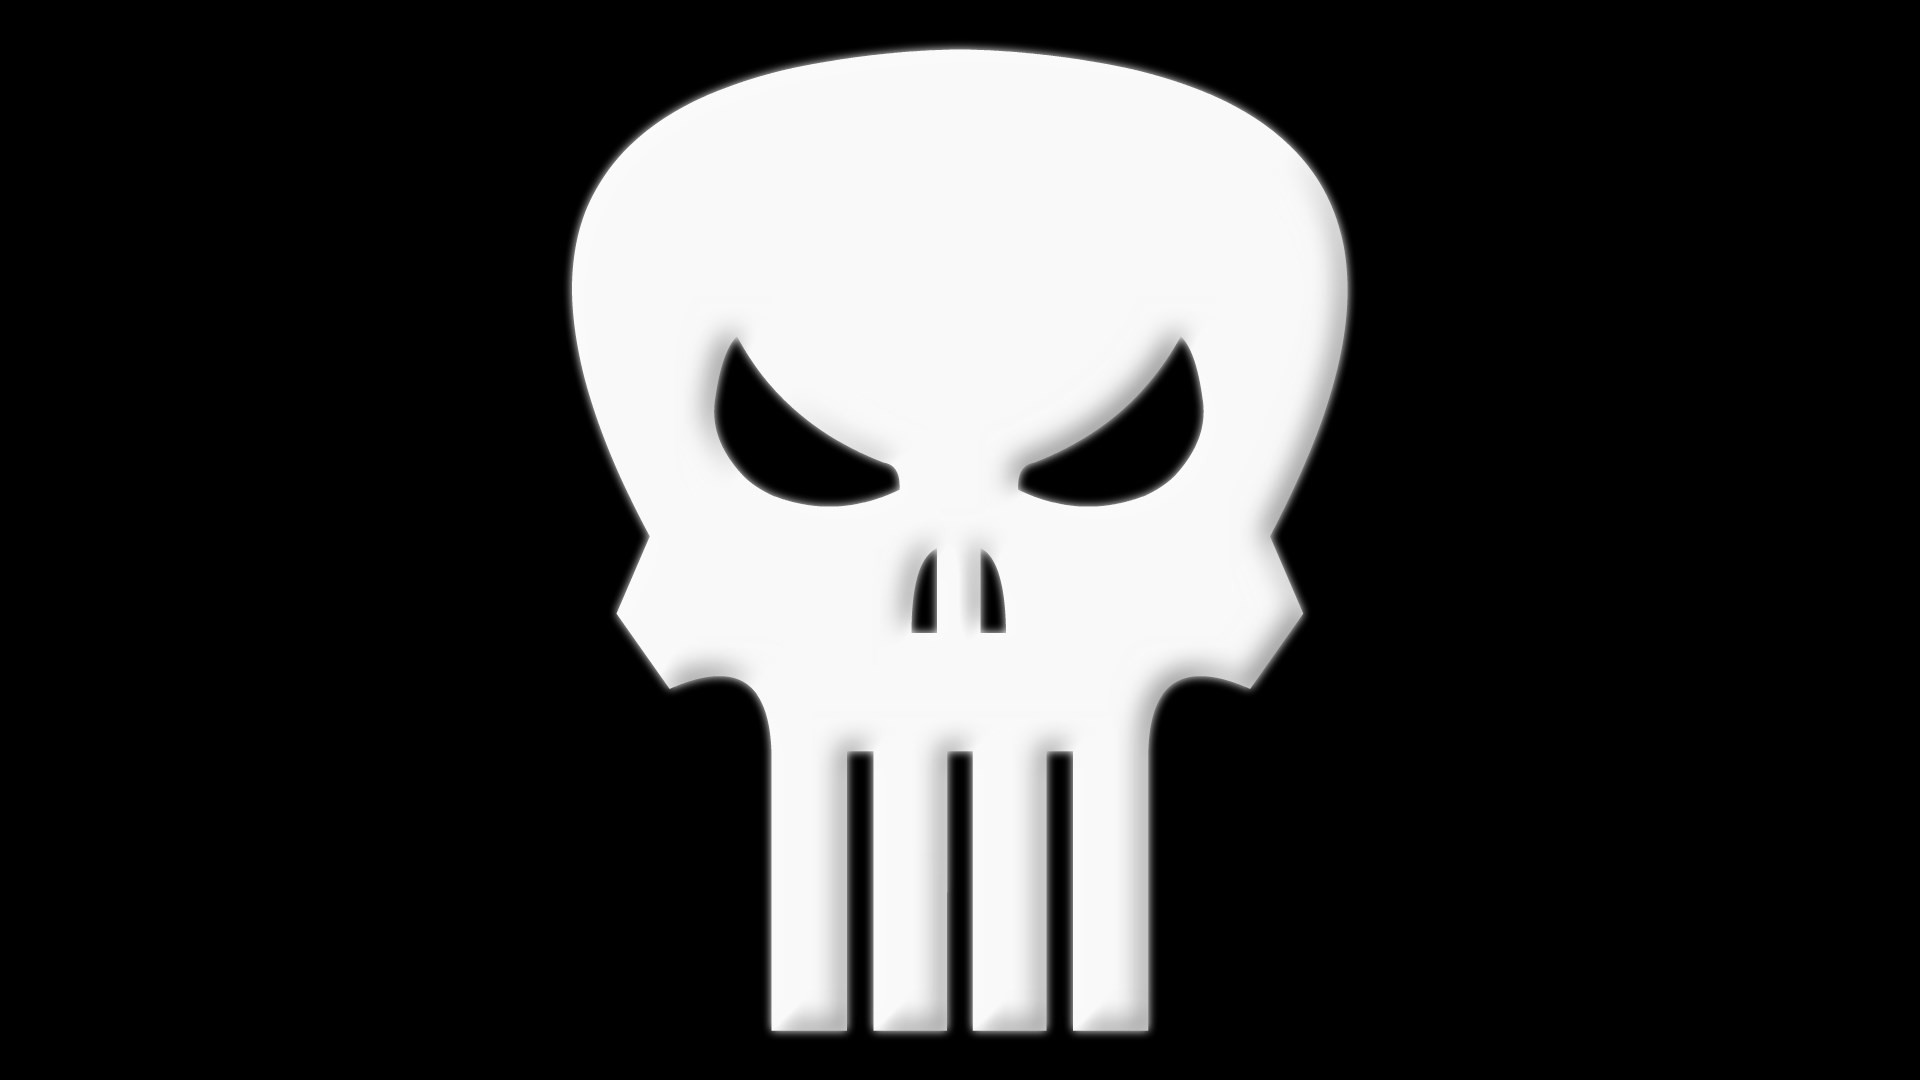 Free wallpaper and screensavers for the punisher